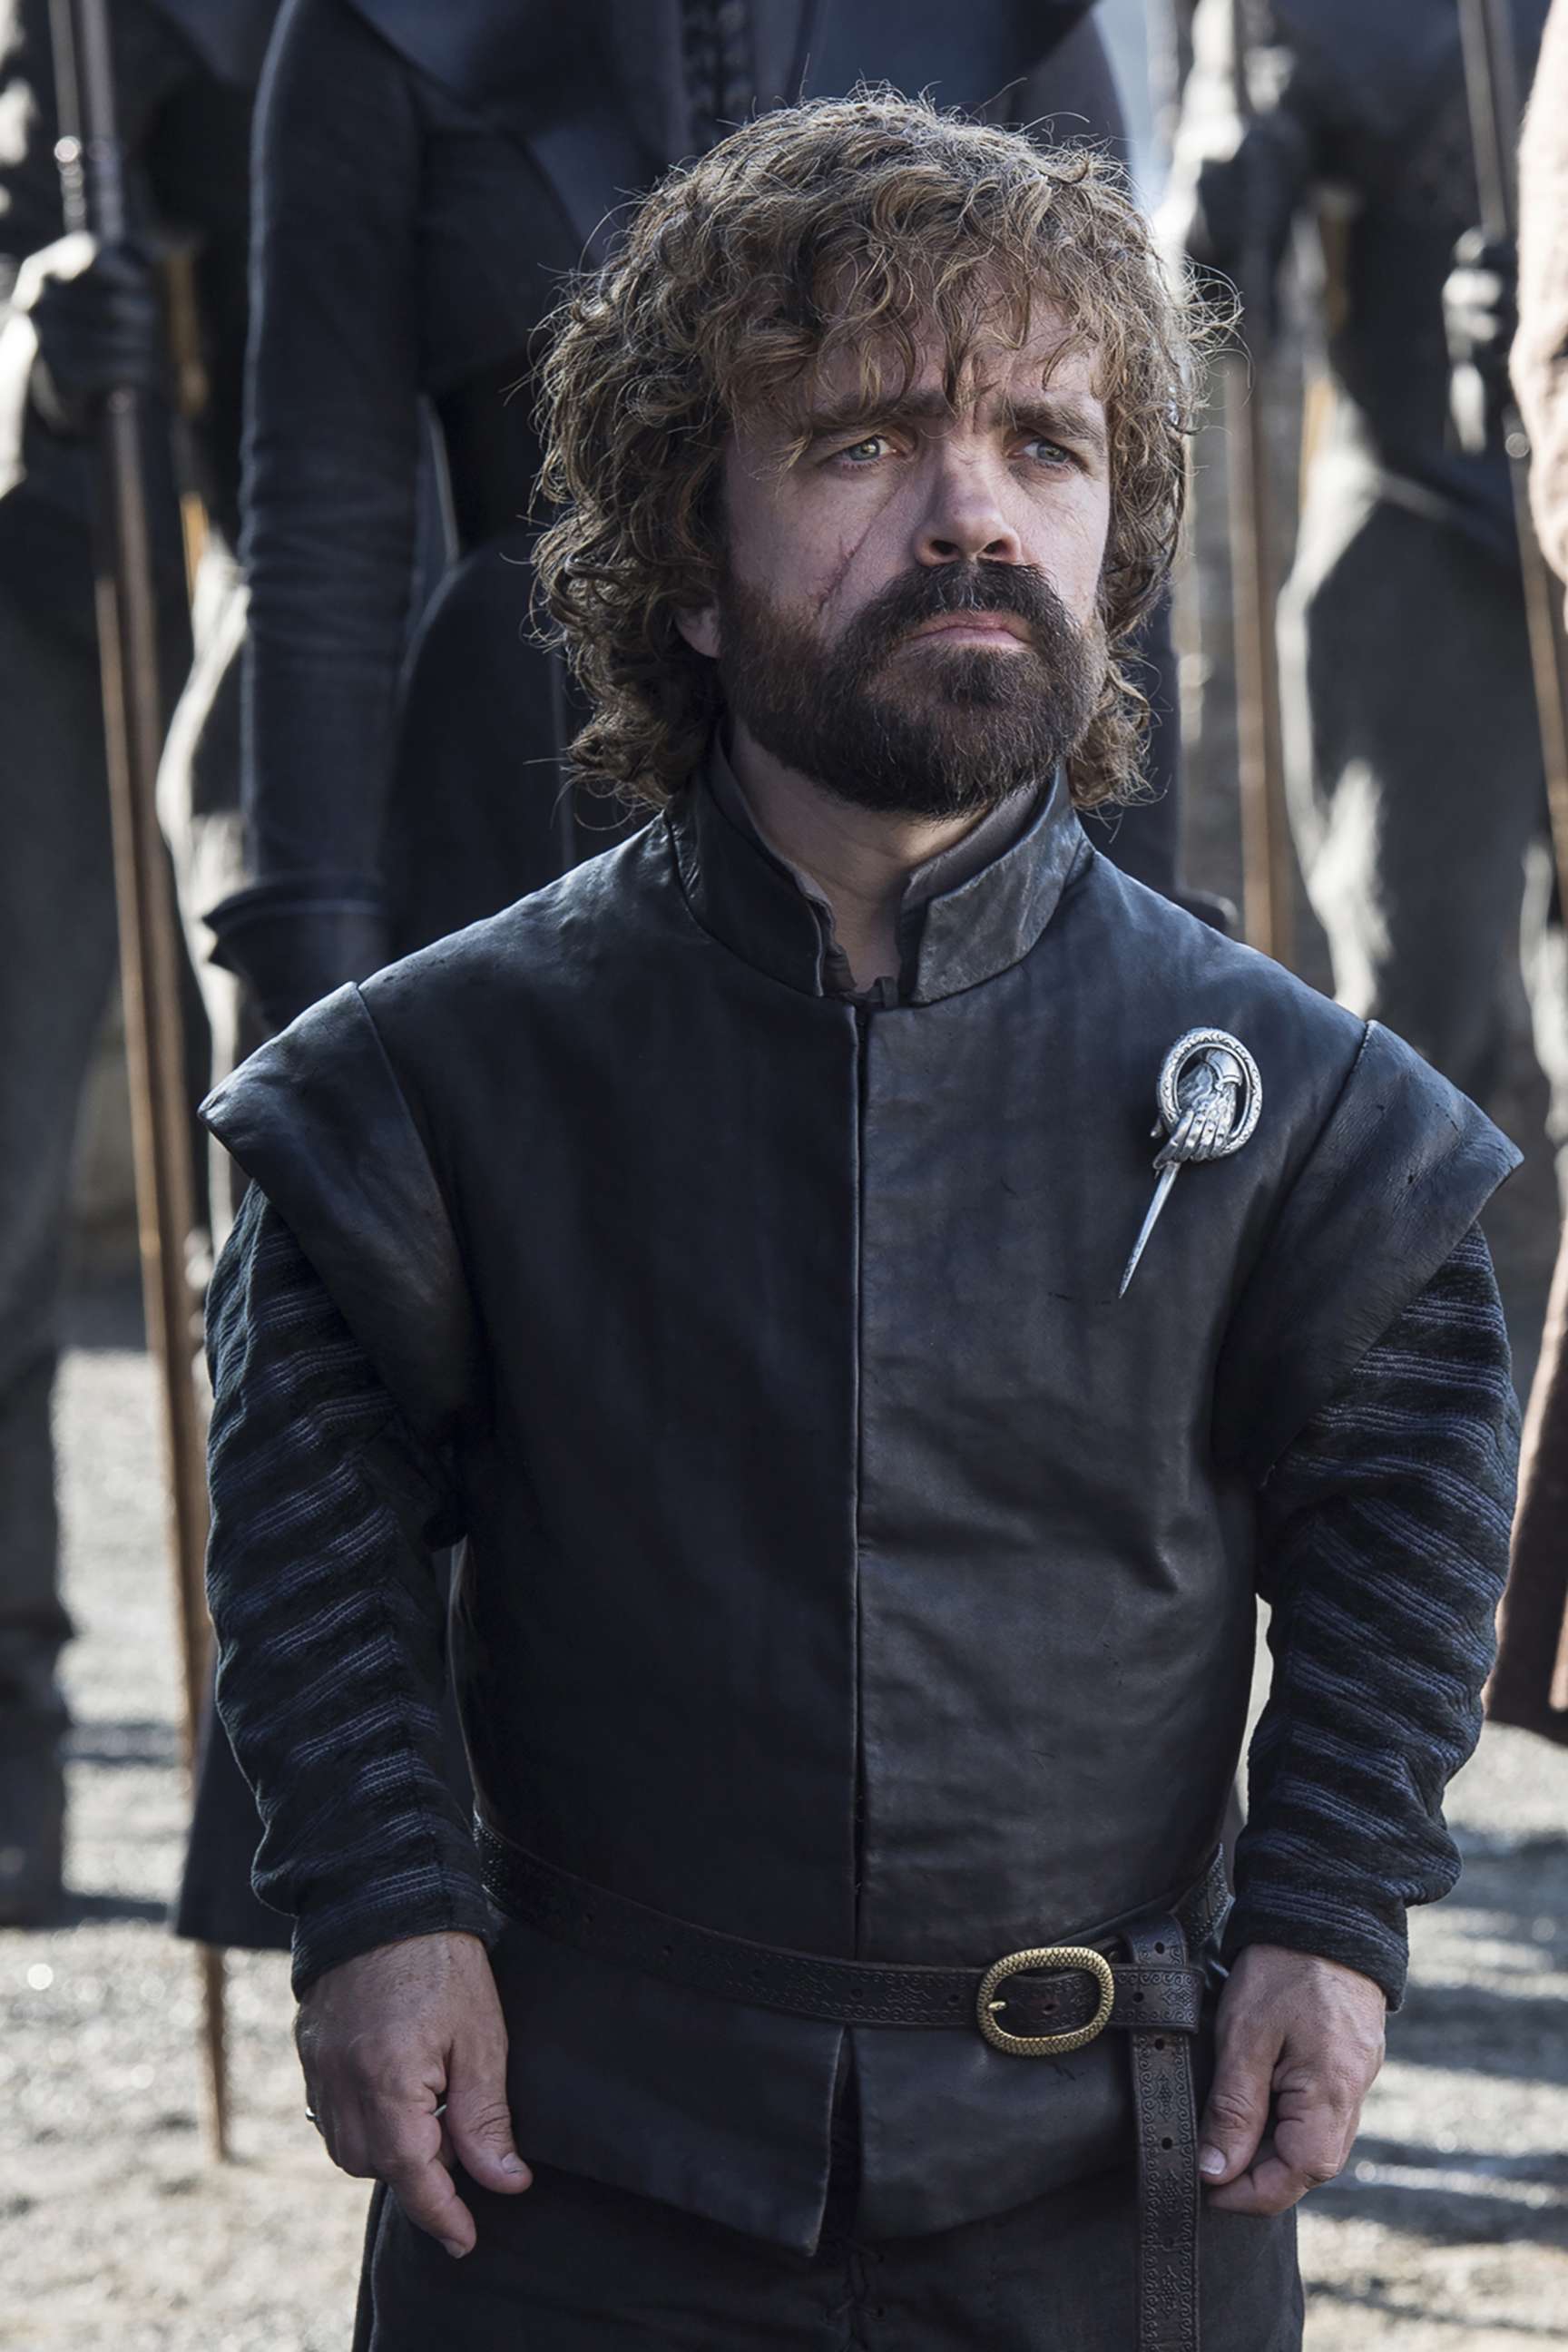 PHOTO: Peter Dinklage as Tyrion Lannister in the "Game of Thrones."